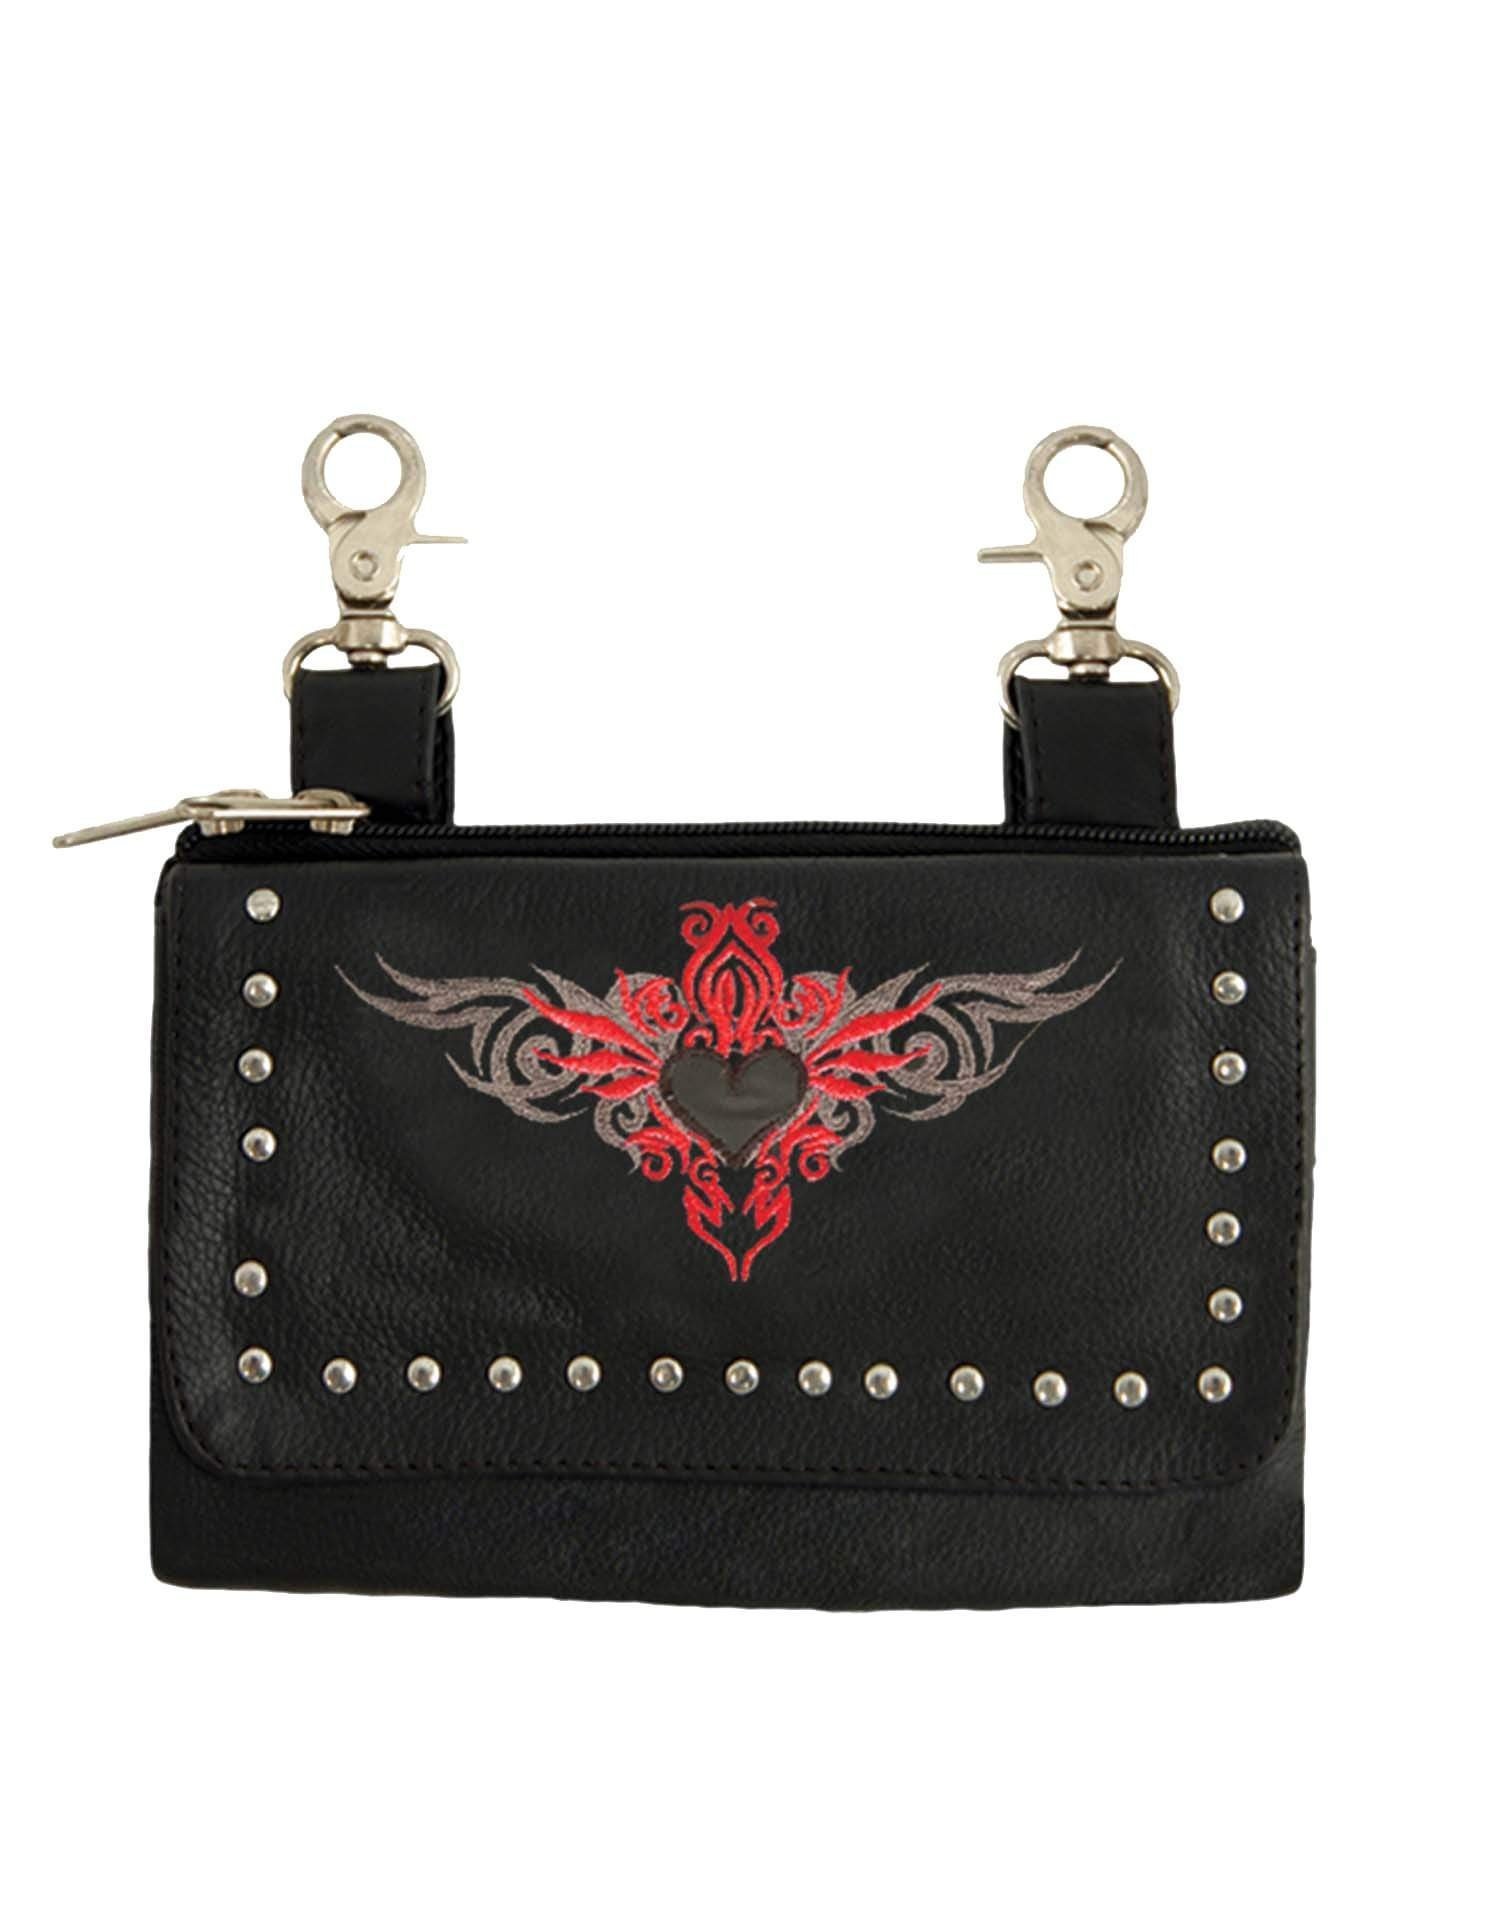 Clip on Bag - Embroidery - Tribal Heart Design - Red - 2156-01-UN